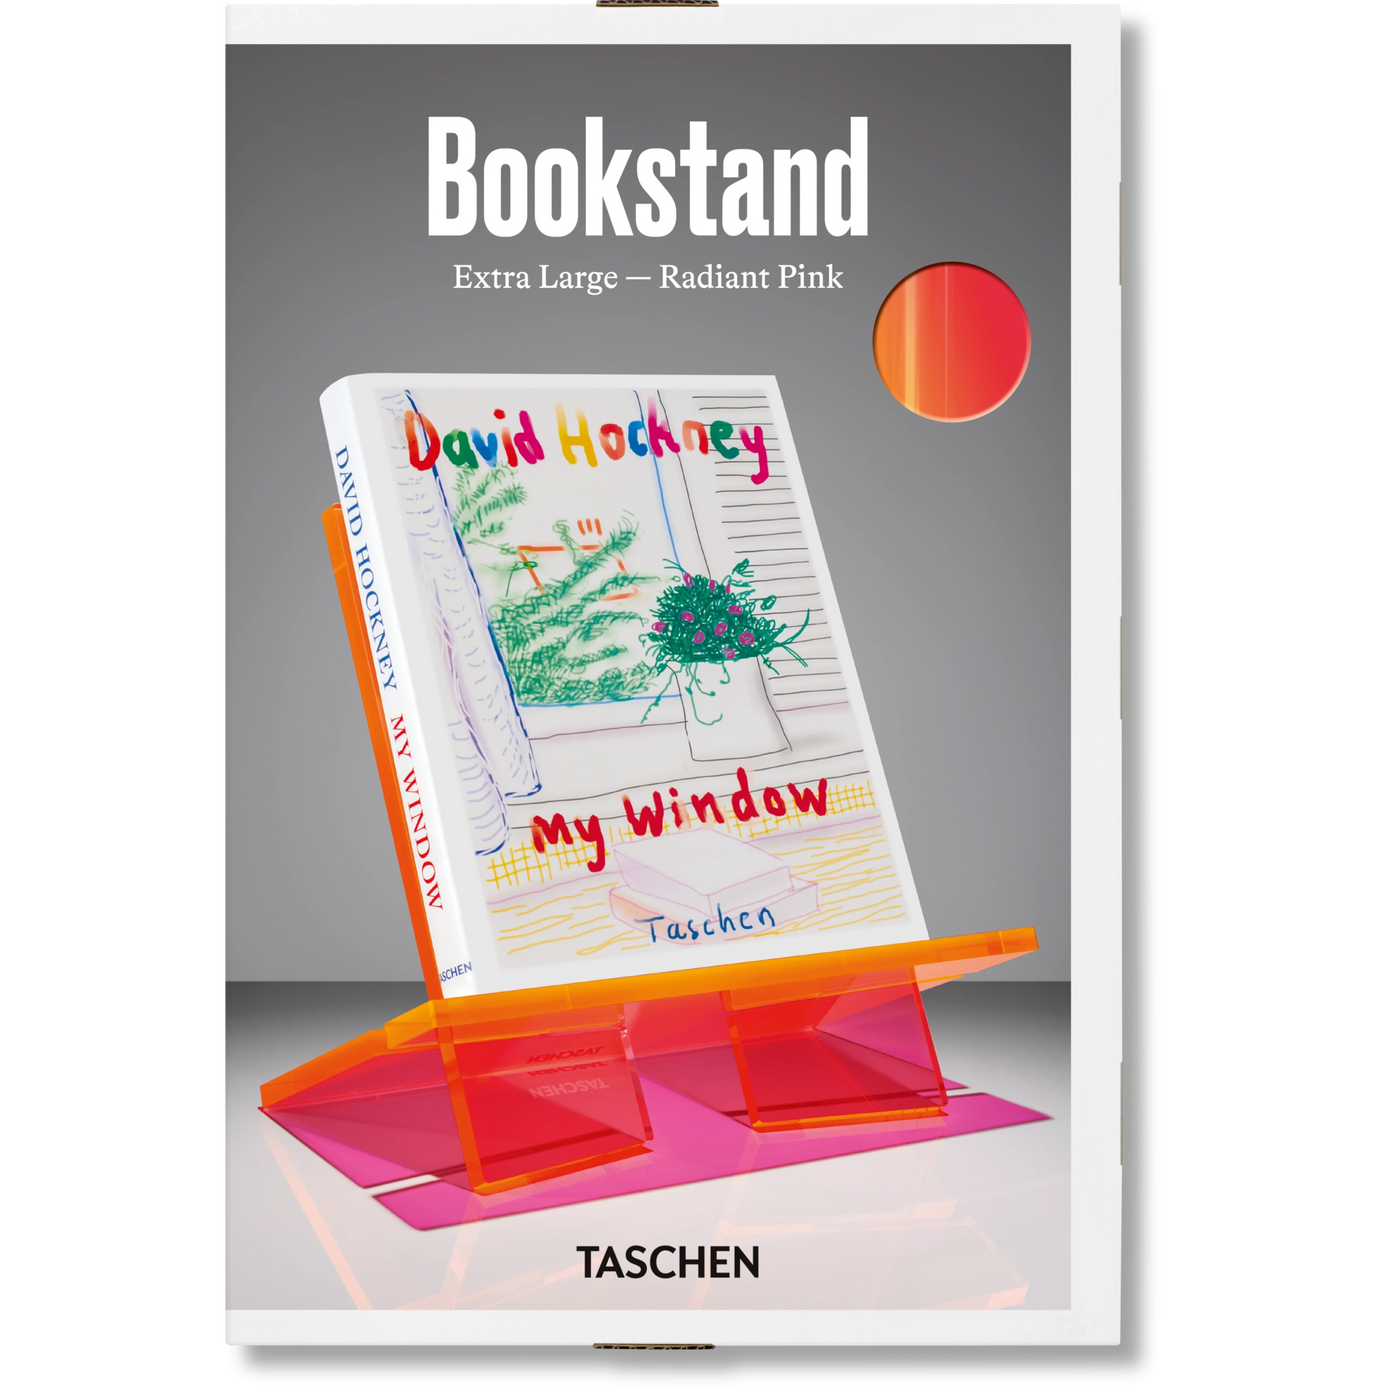 TASCHEN's Bookstand - Extra Large - Radiant Pink